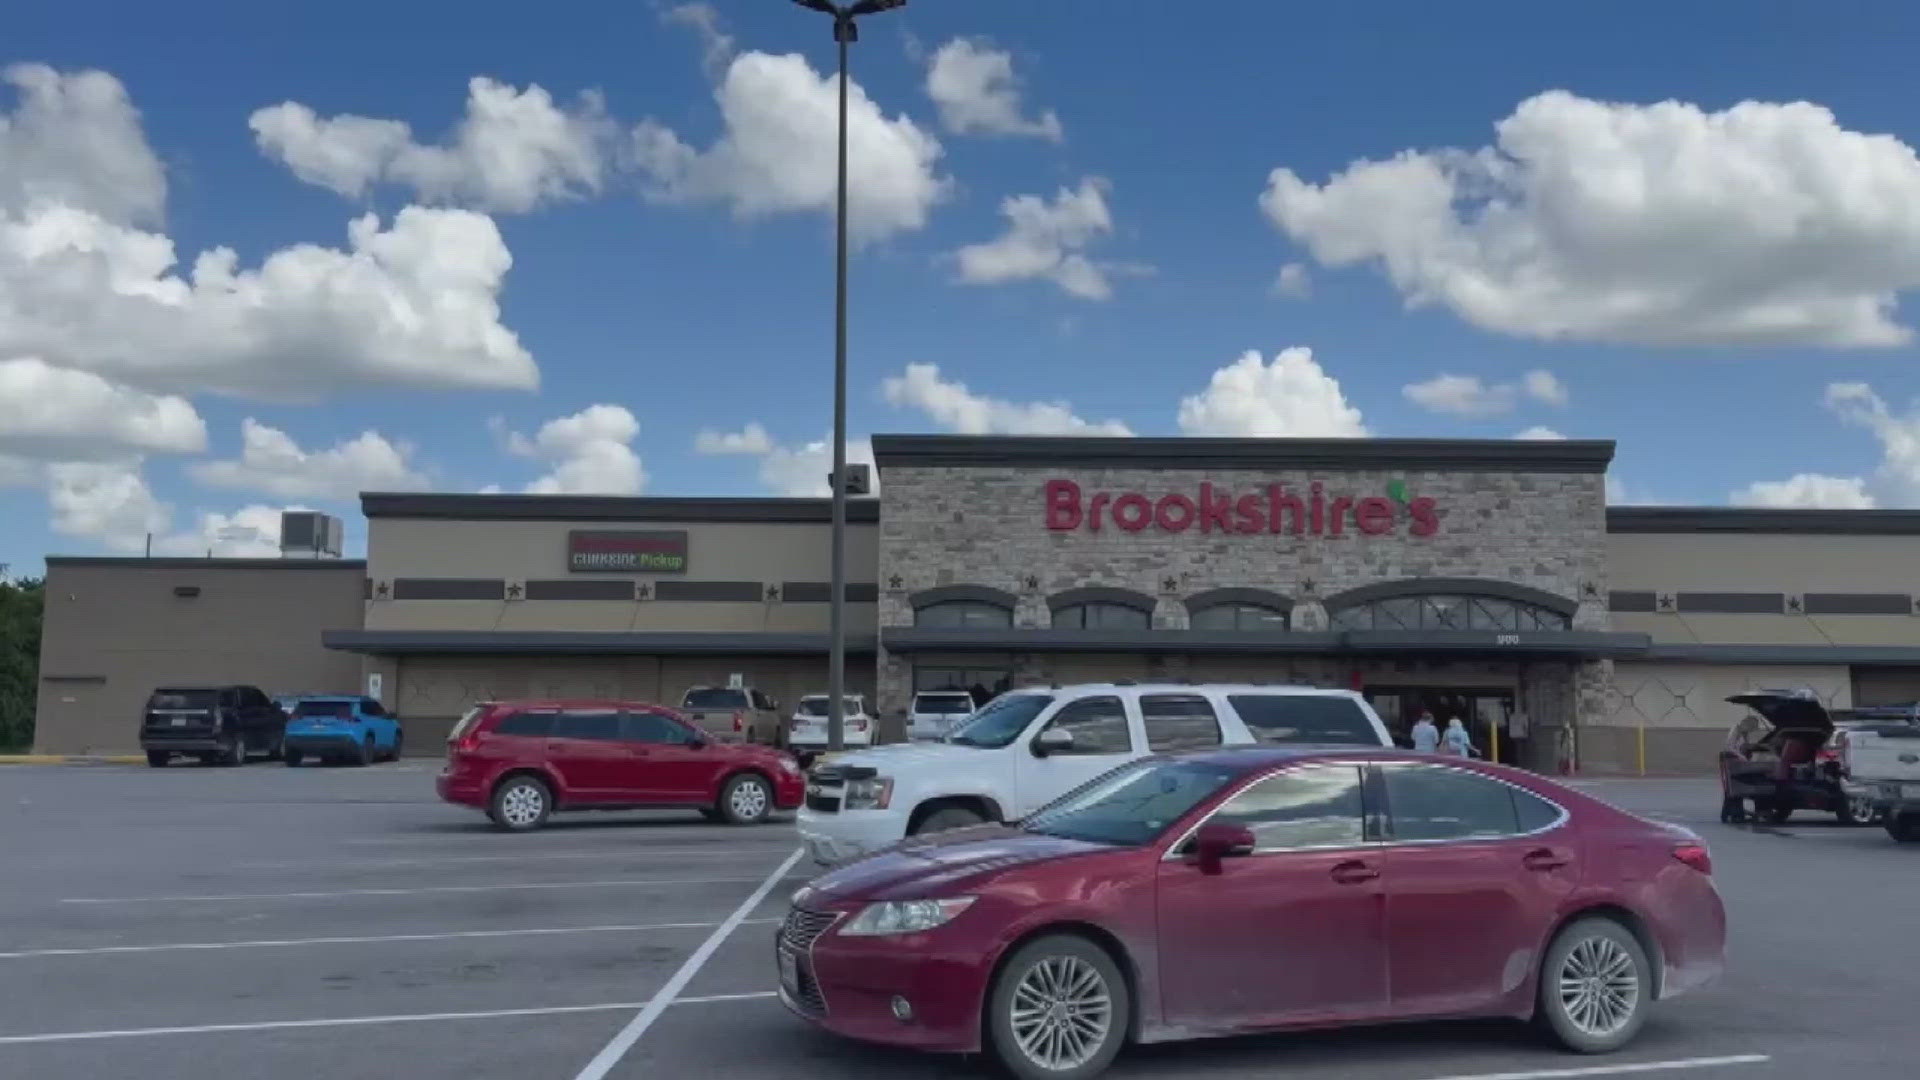 The Clifton Brookshire's had to be searched by law enforcement after receiving a threat on June 24.